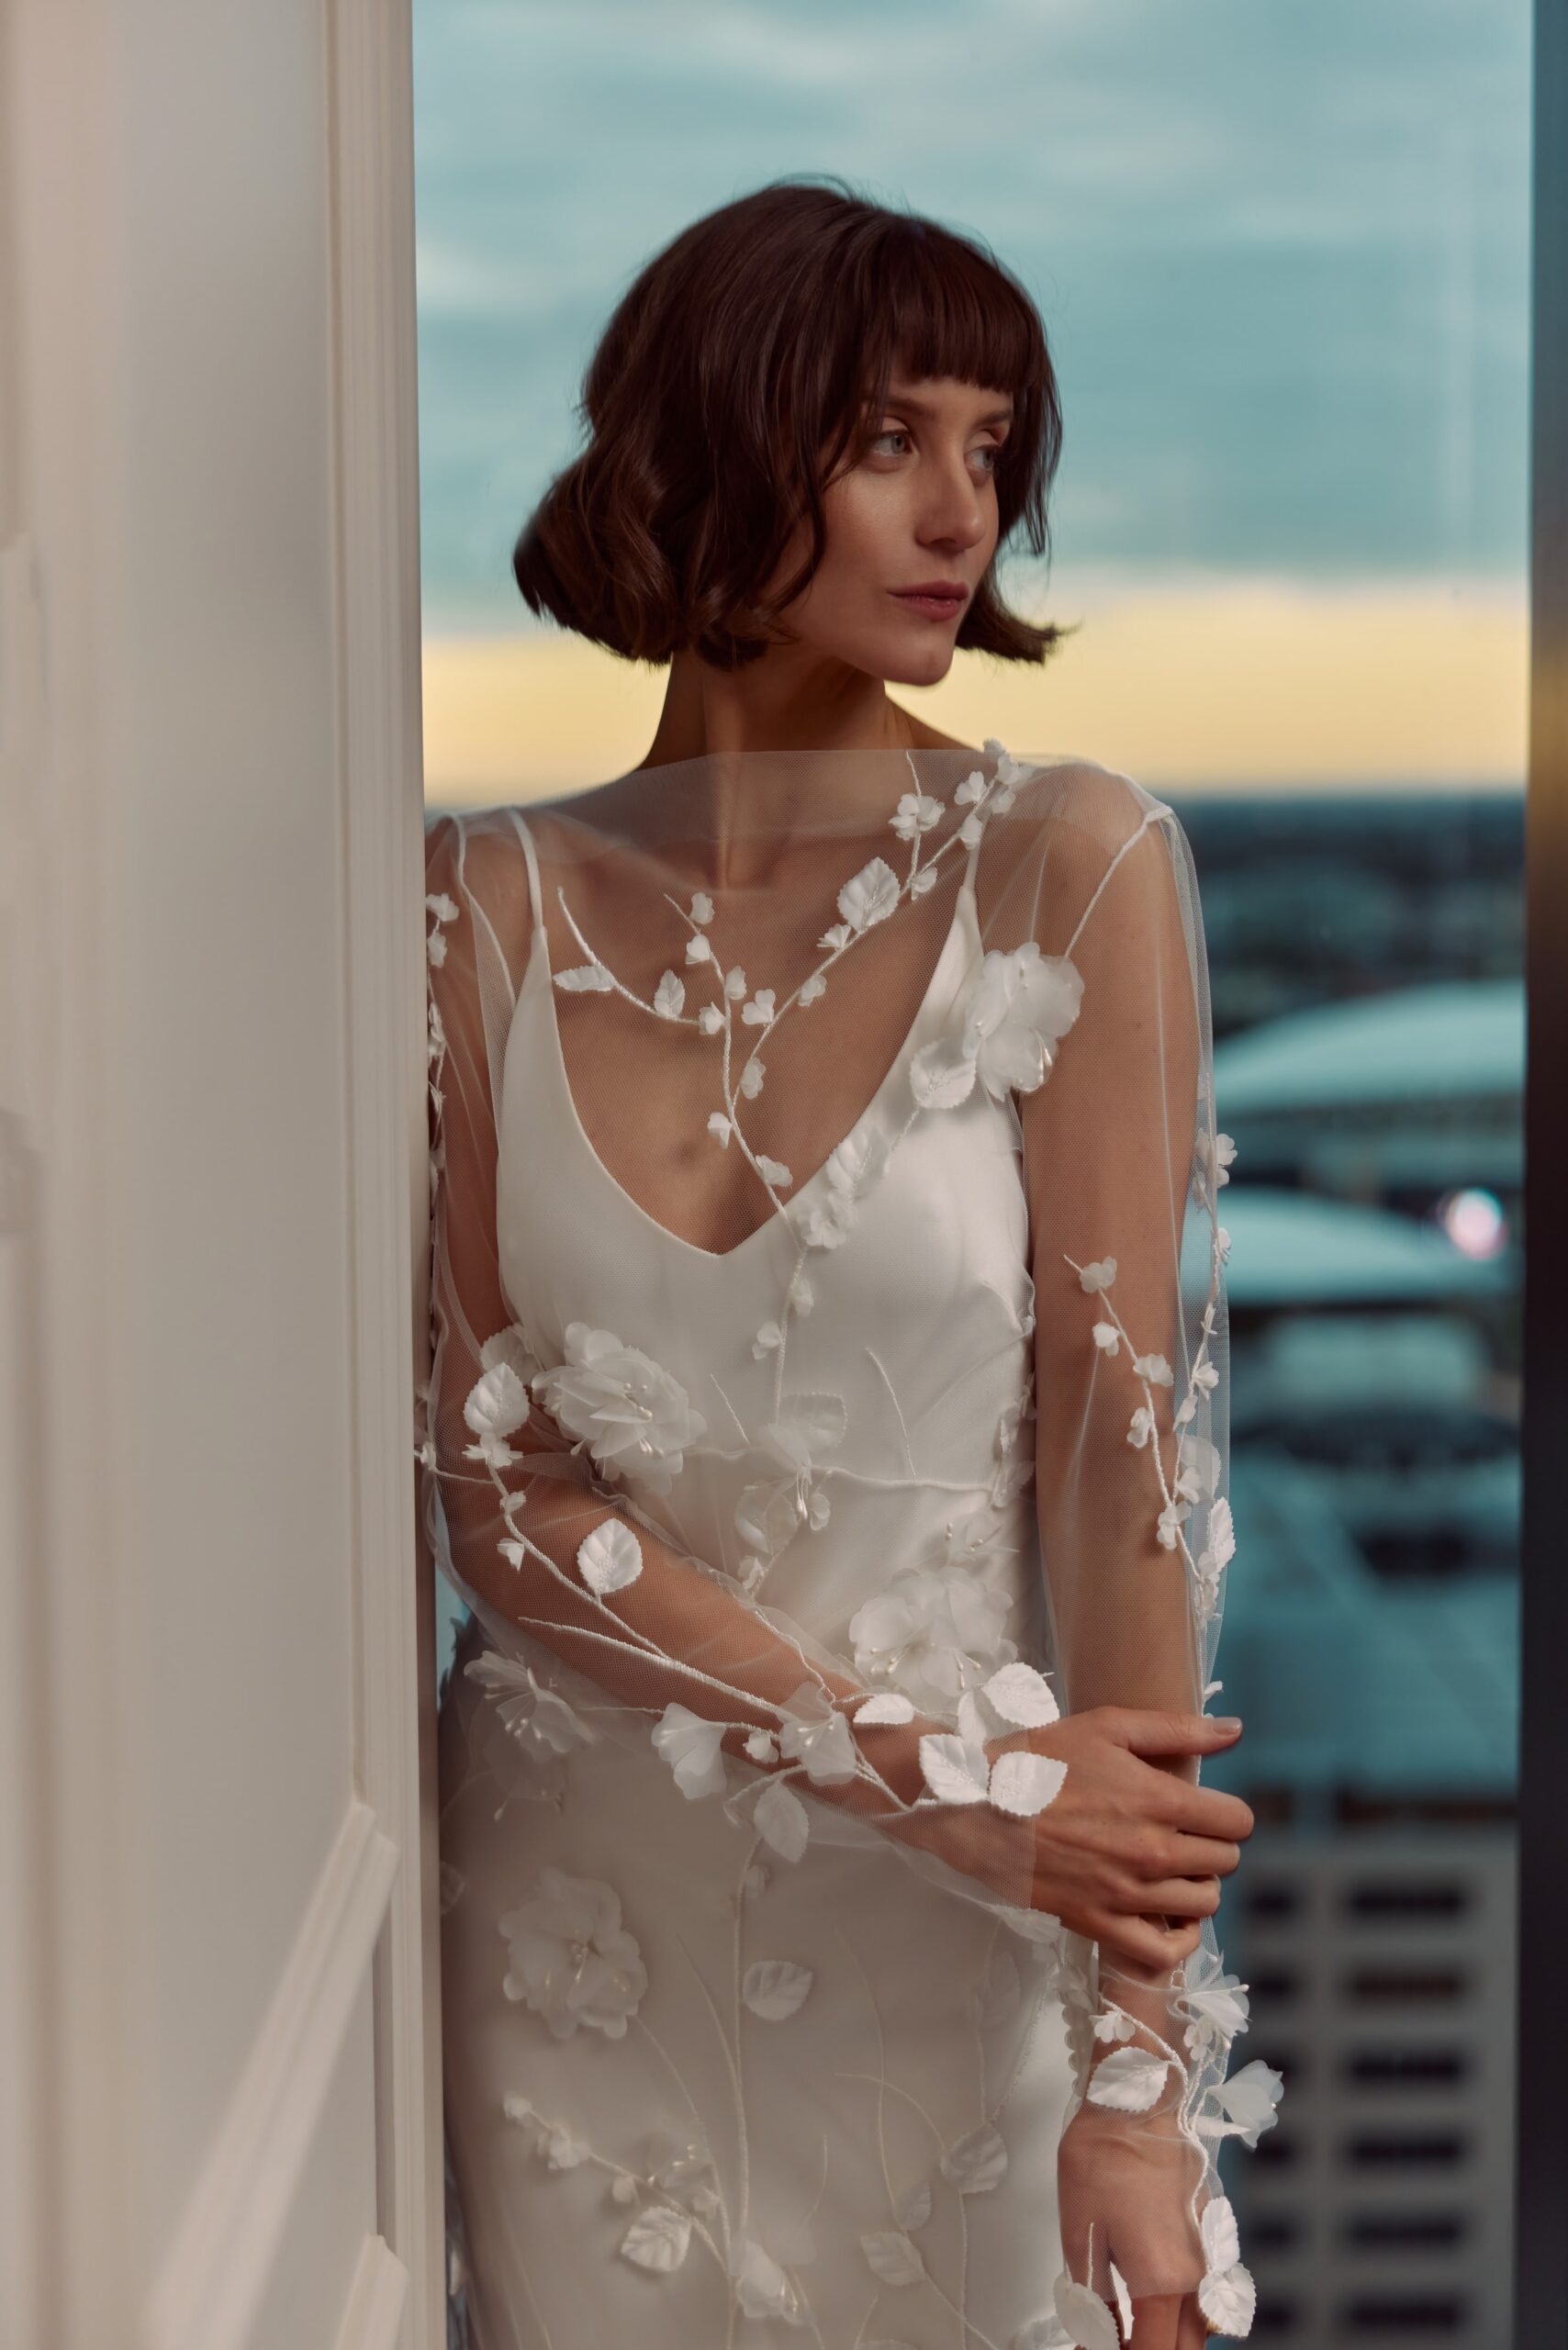 Manon overlay and Loulou slip - a sheer overlay featuring 3D floral lace worn over a V-neck satin slip gown.